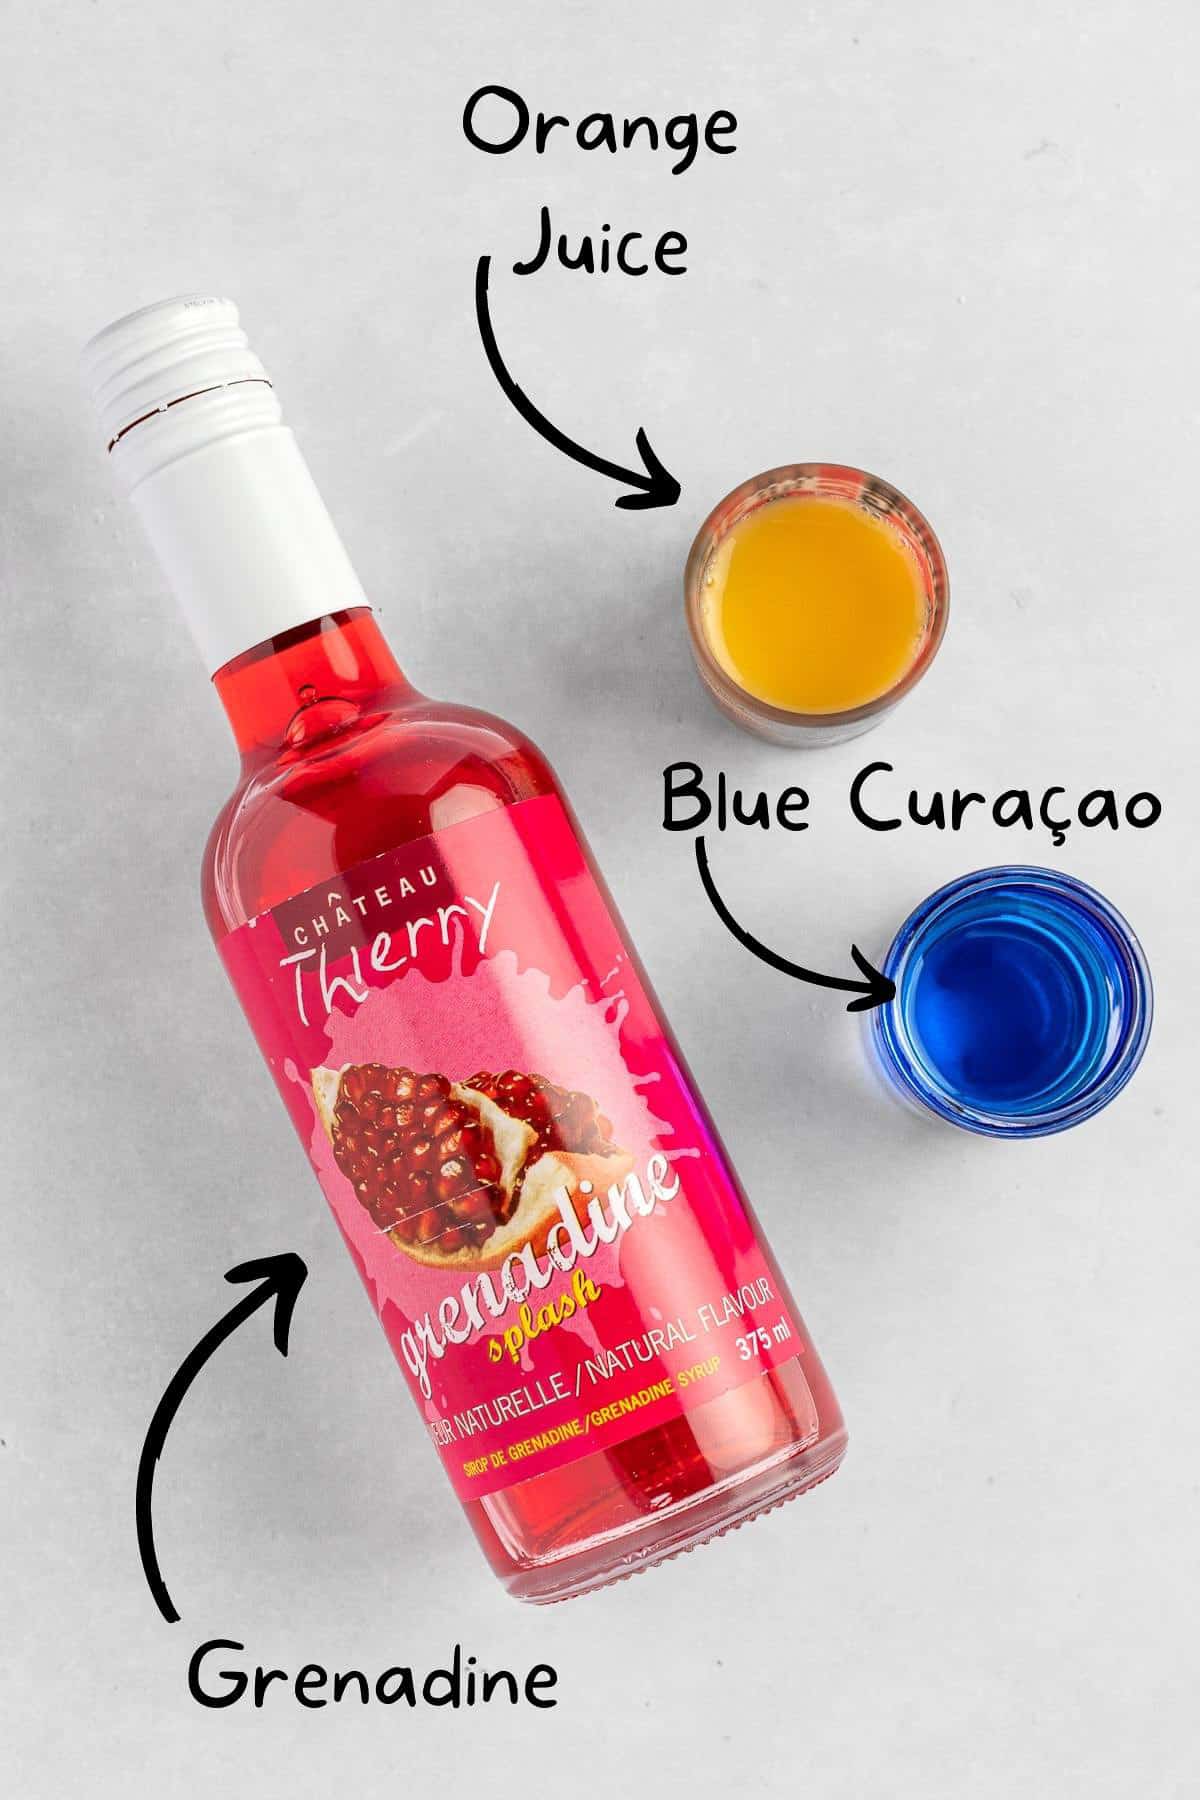 The ingredients needed to make the rainbow shots.